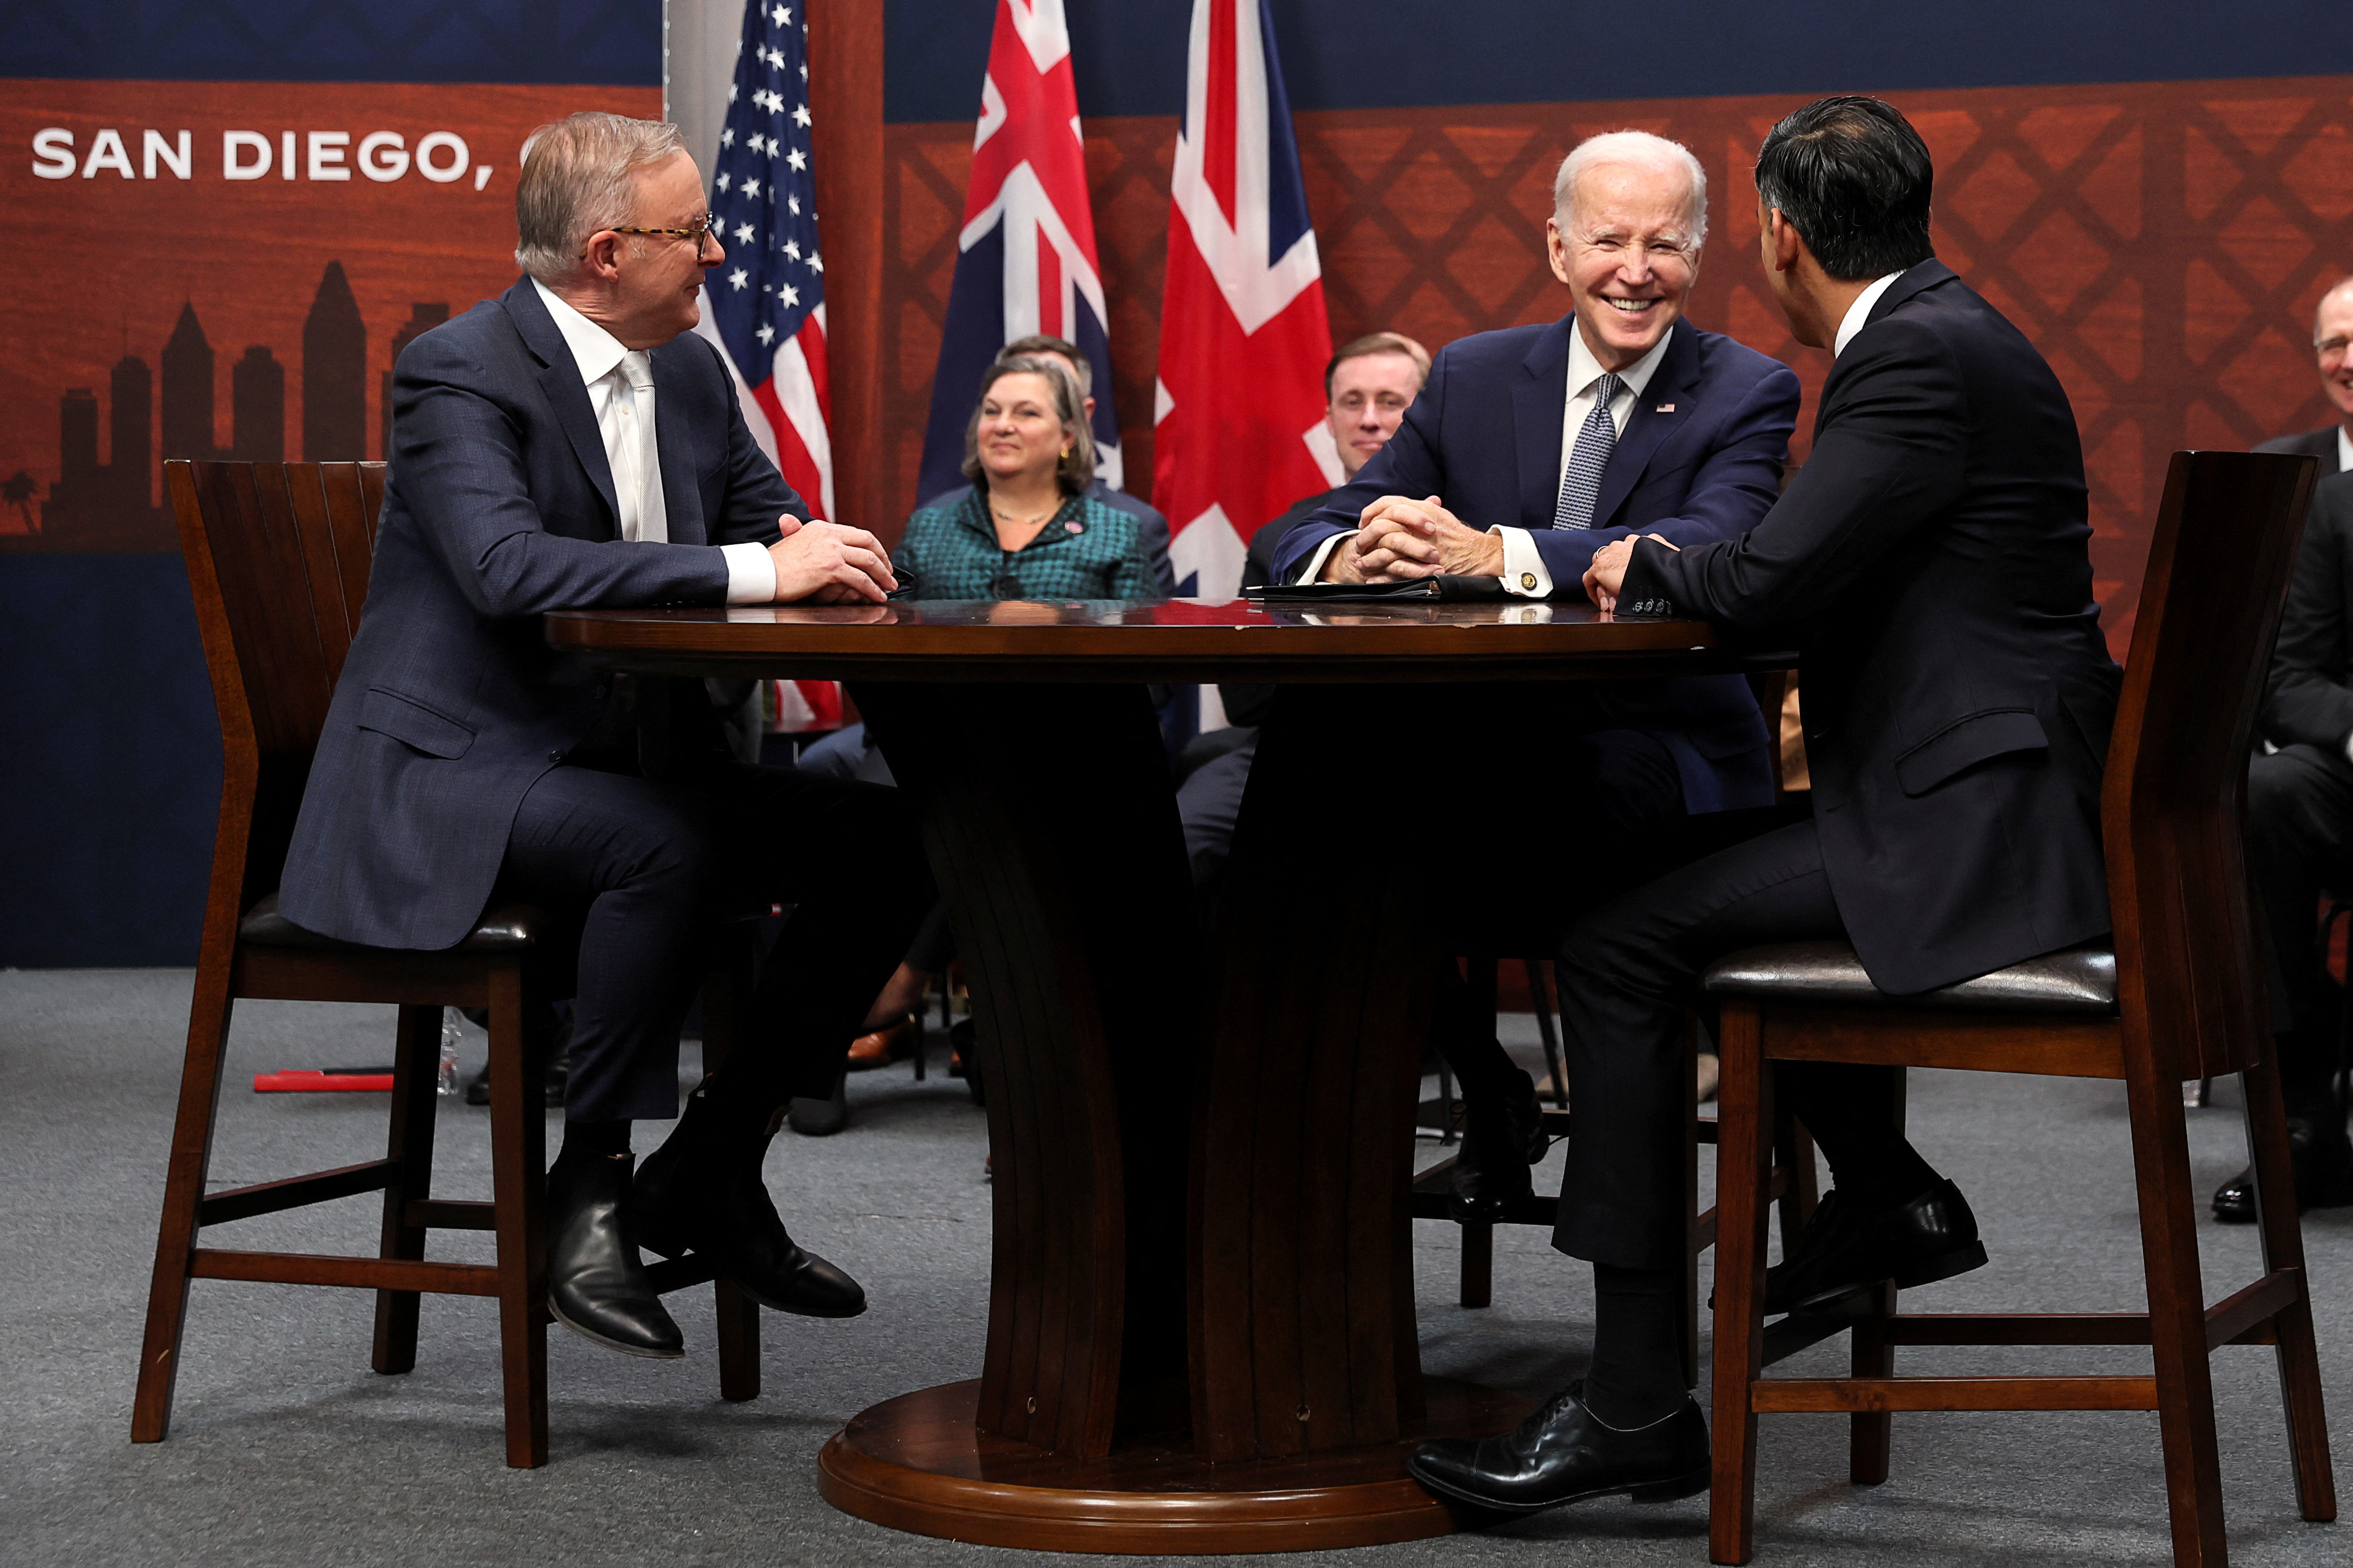 U.S. President Biden attends a trilateral meeting with Australian PM Albanese and British PM Sunak at Naval Base Point Loma in San Diego